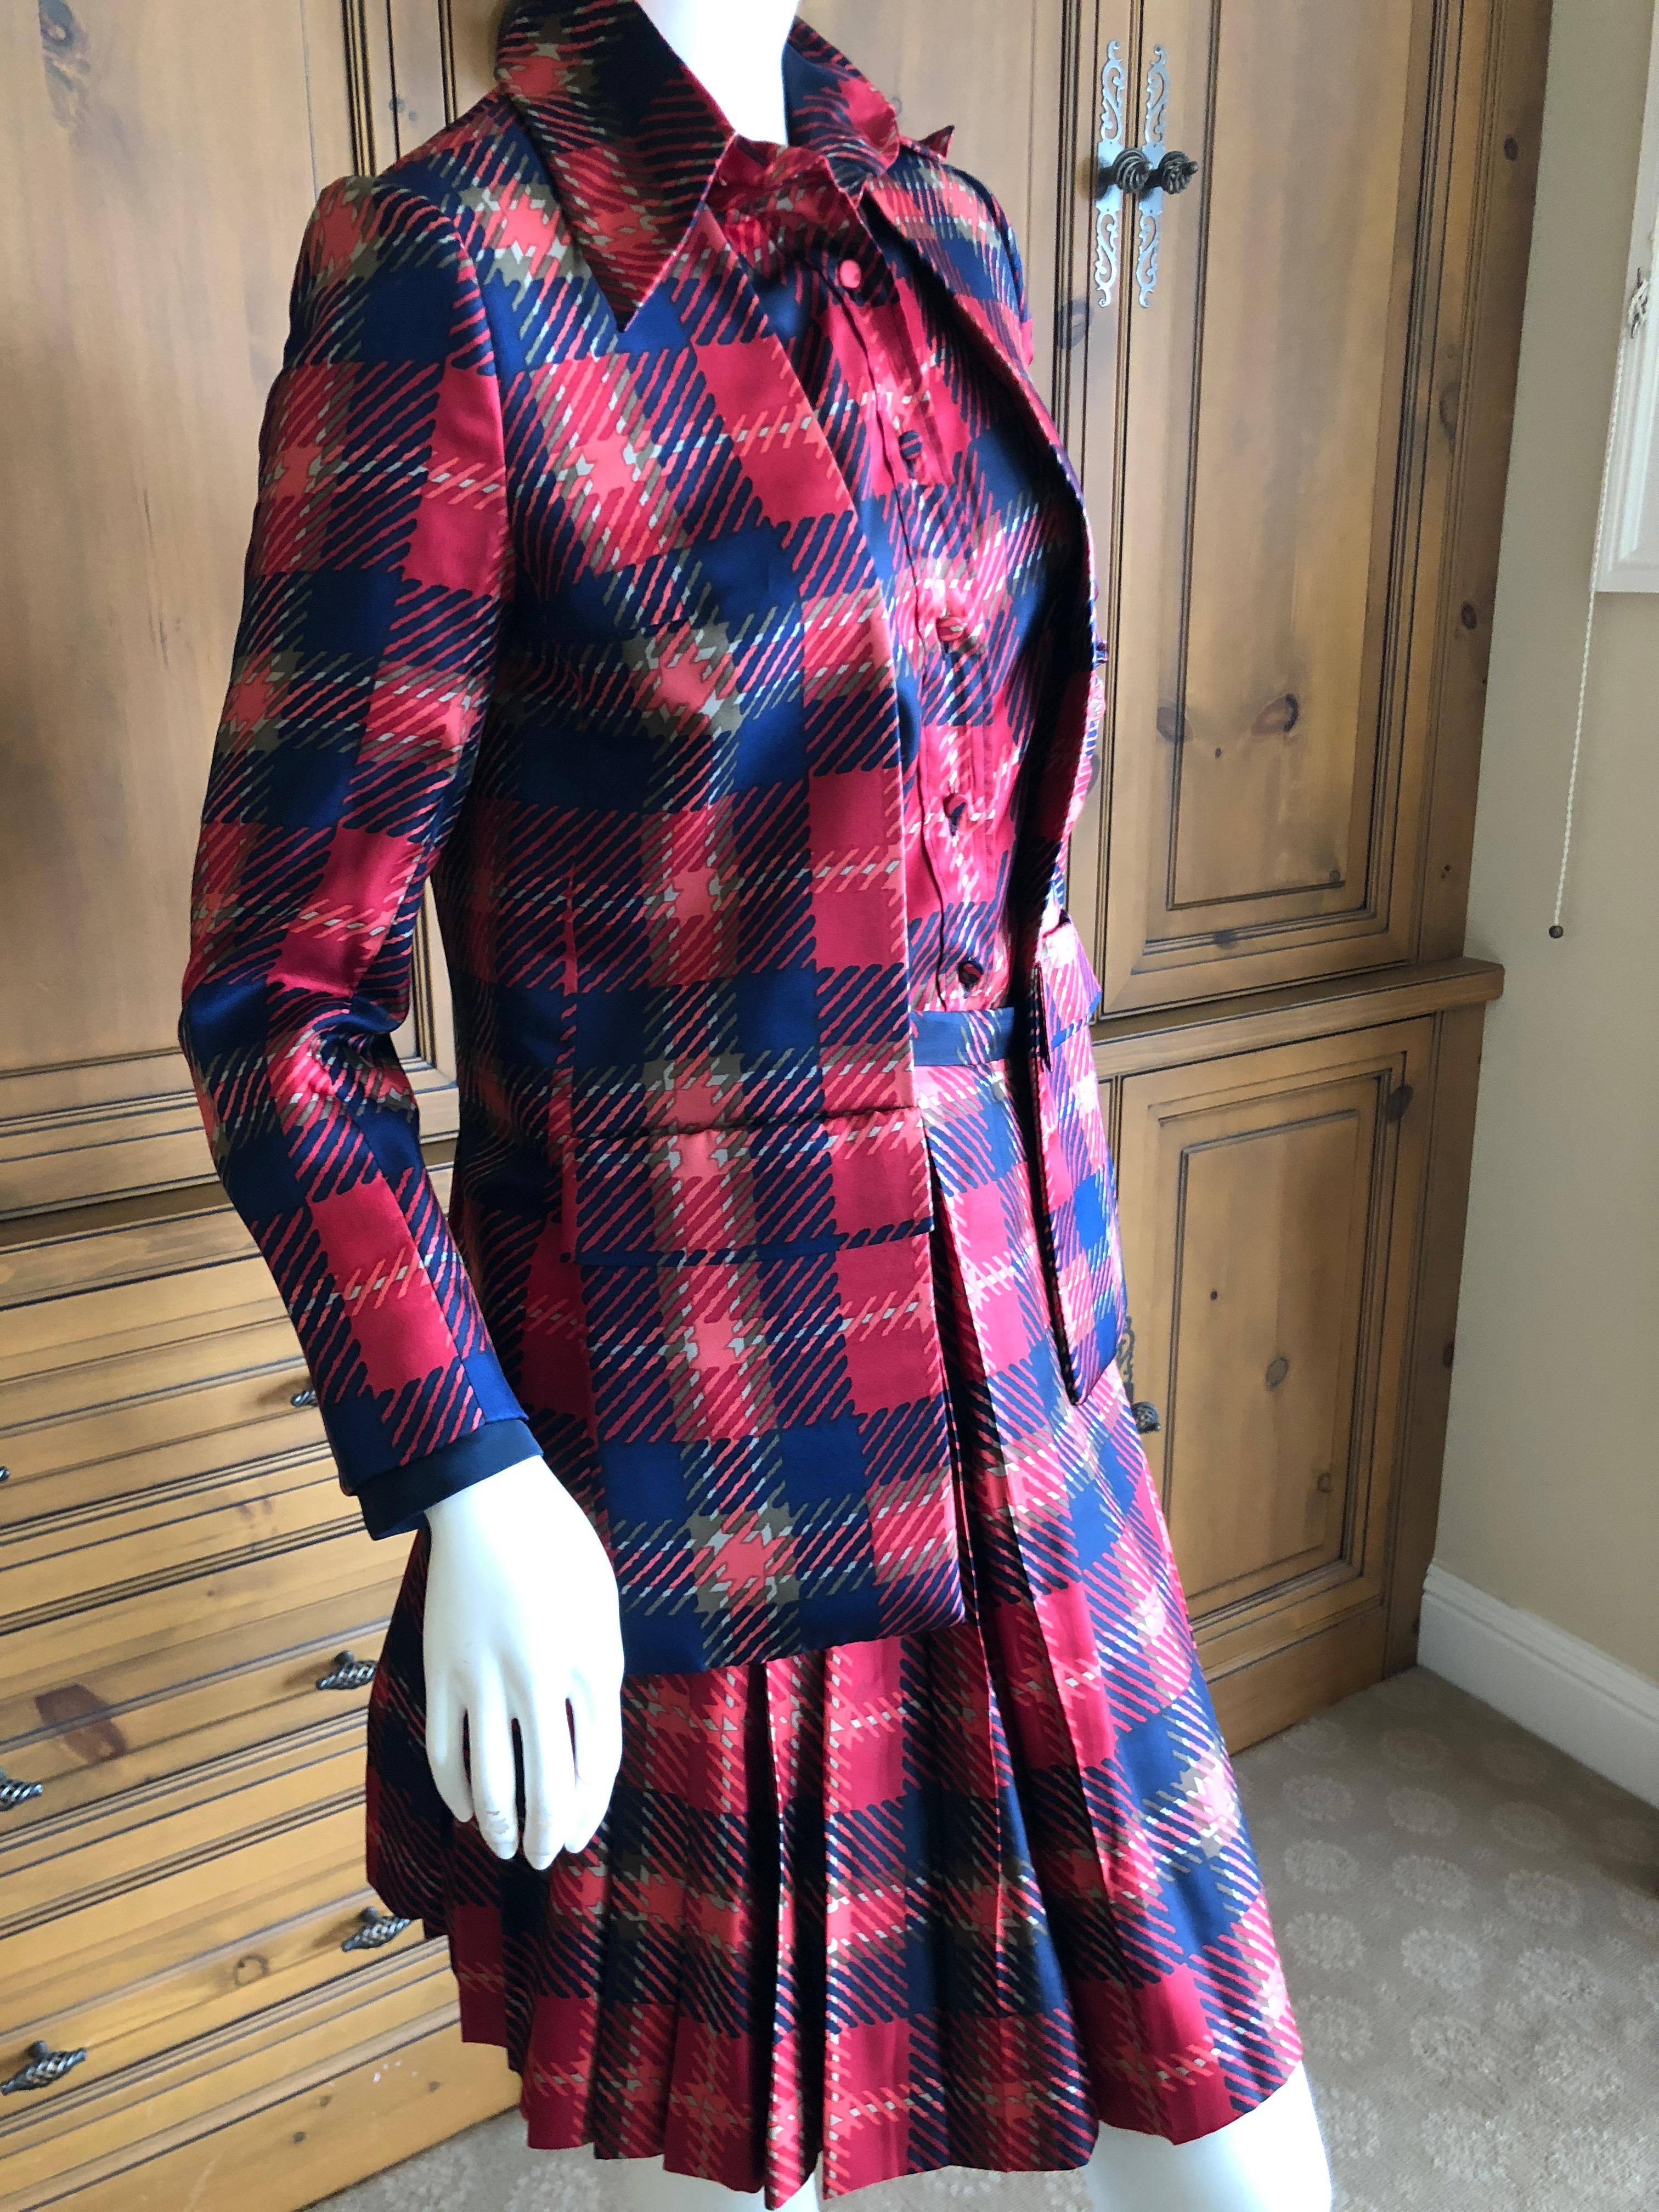 Cardinali Plaid Silk Three Piece Skirt Suit with Jacket Fall 1972 For Sale 6